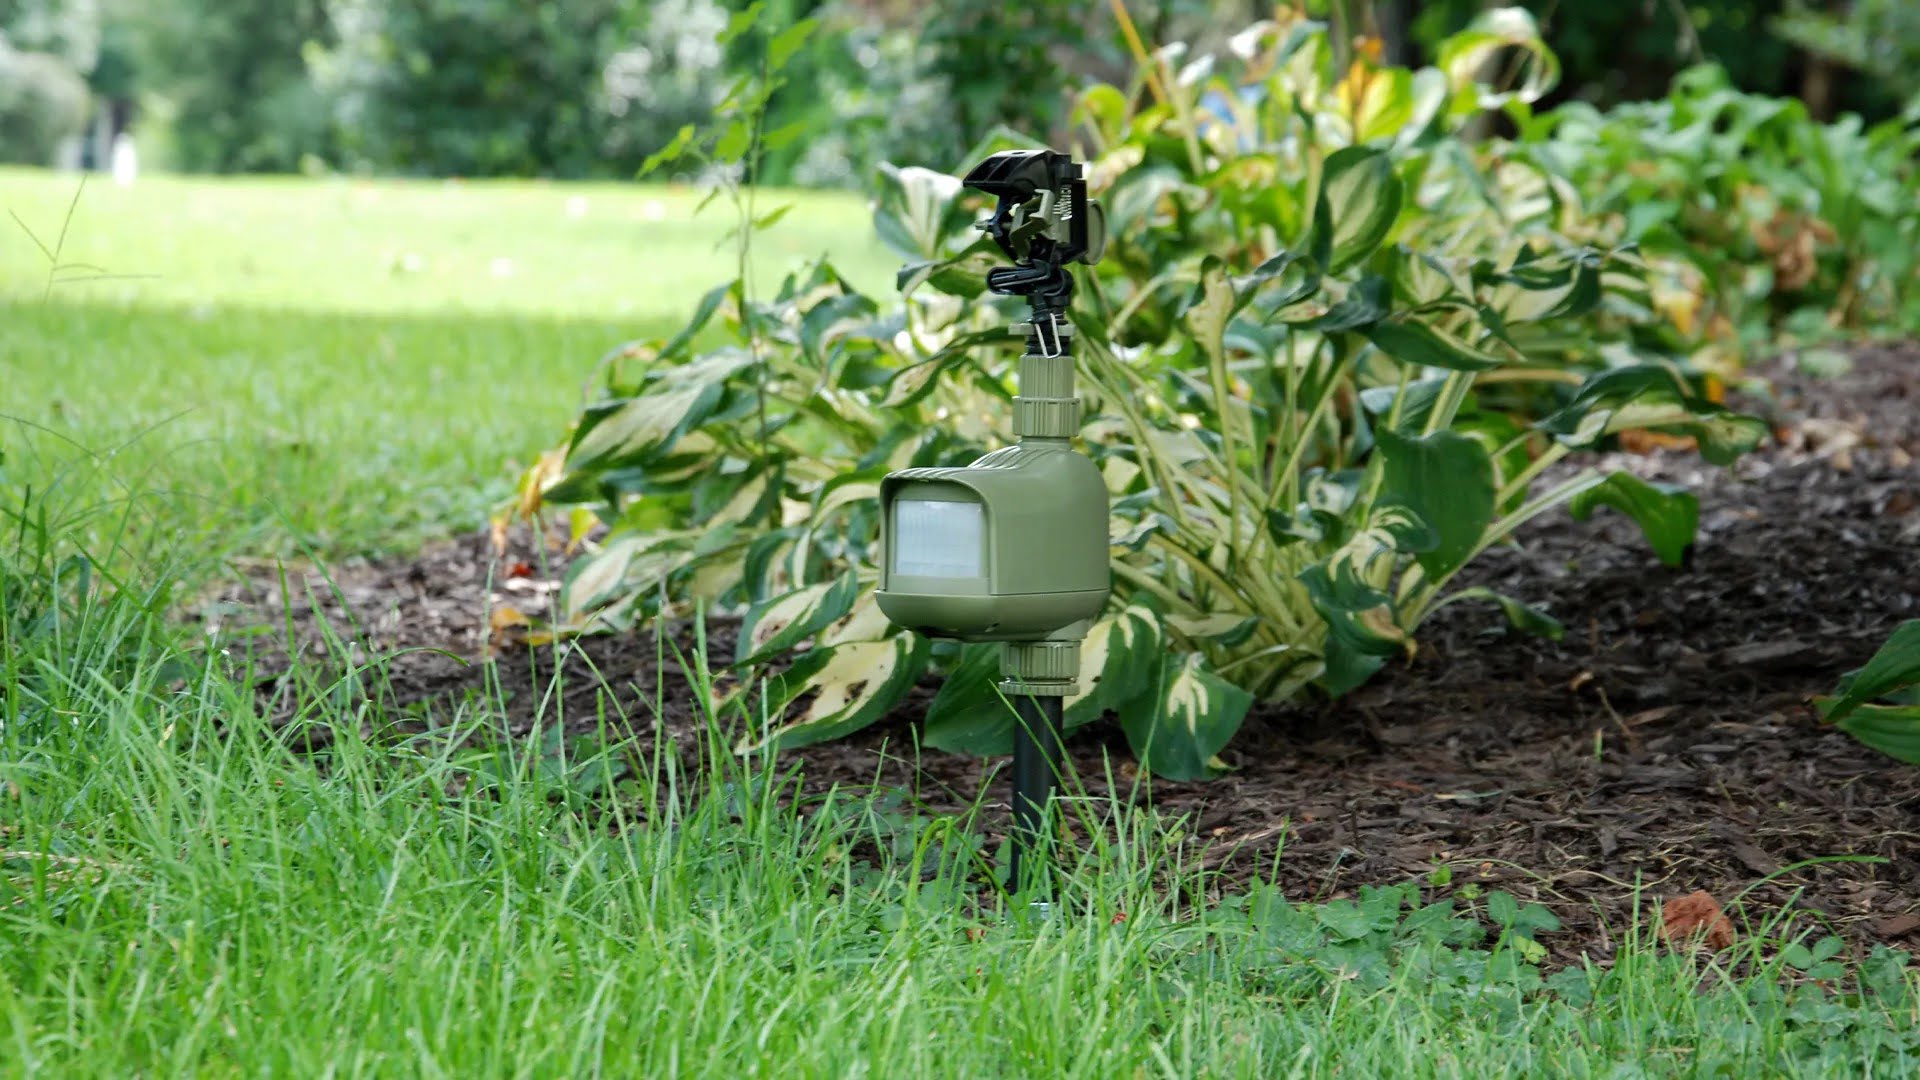 How To Connect A Motion Detector To A Sprinkler System